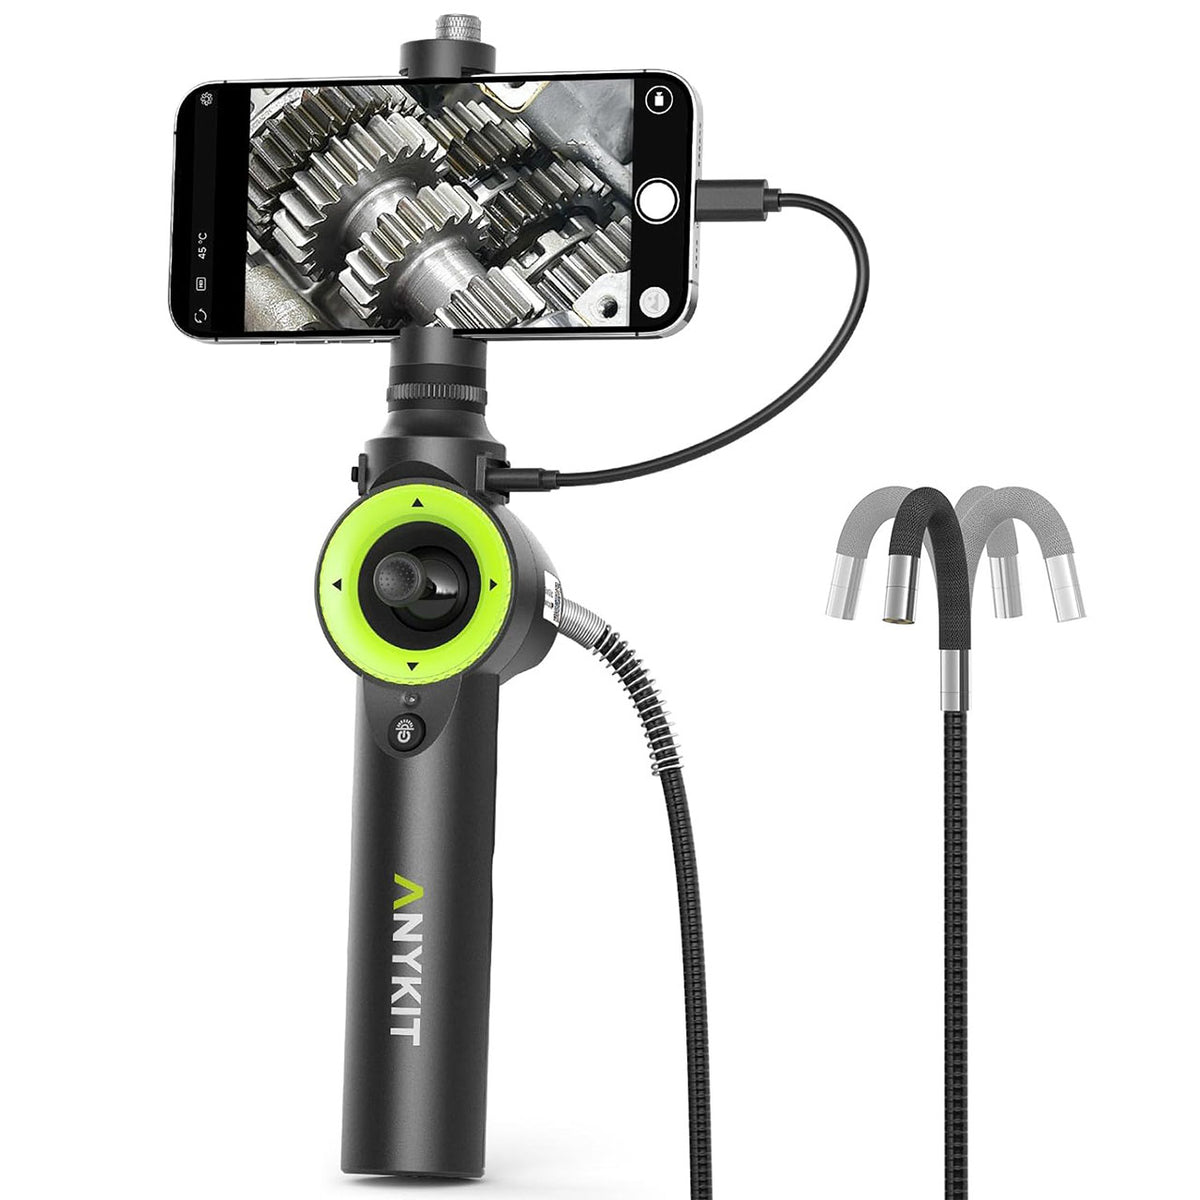 Anykit 360° 4 Ways Articulating Borescope, Industrial Endoscope with 0.26 in Articulated Snake Camera, Inspection Camera with 4 Adjustable LED Lights Compatible with iPhone and Android - 3.3ft